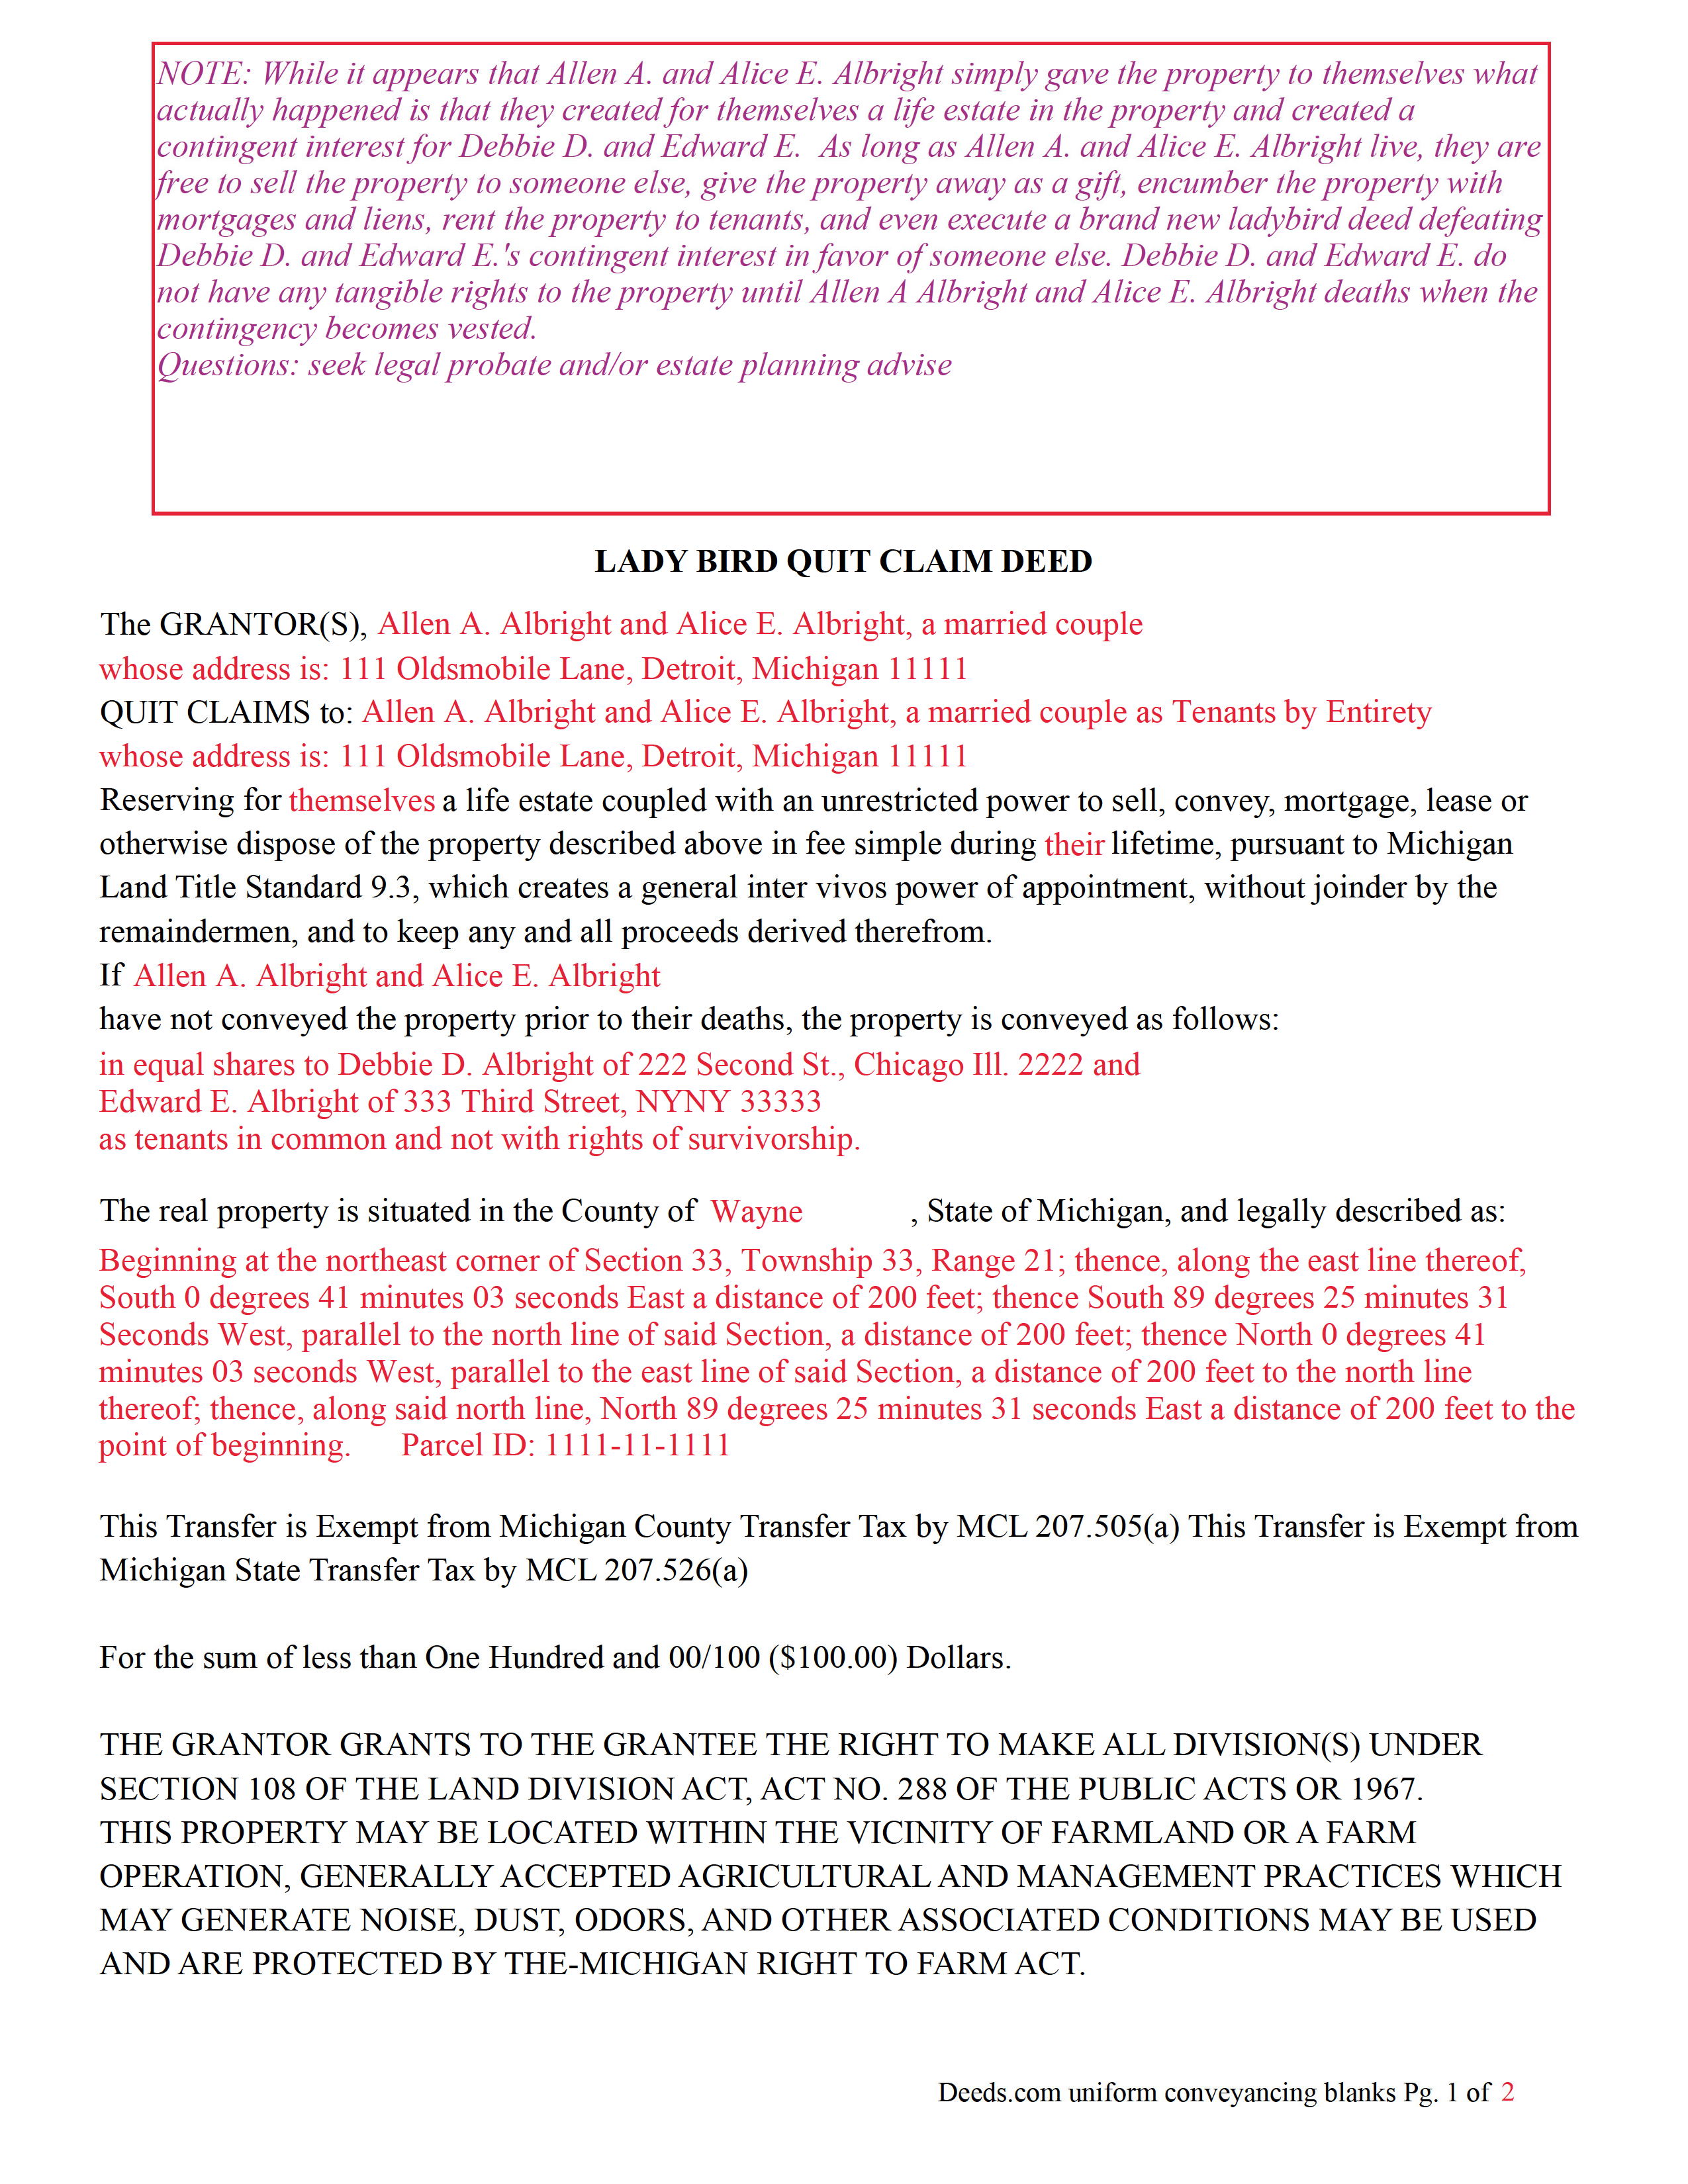 Completed Example Version 1 of the Lady Bird Quitclaim Deed Document